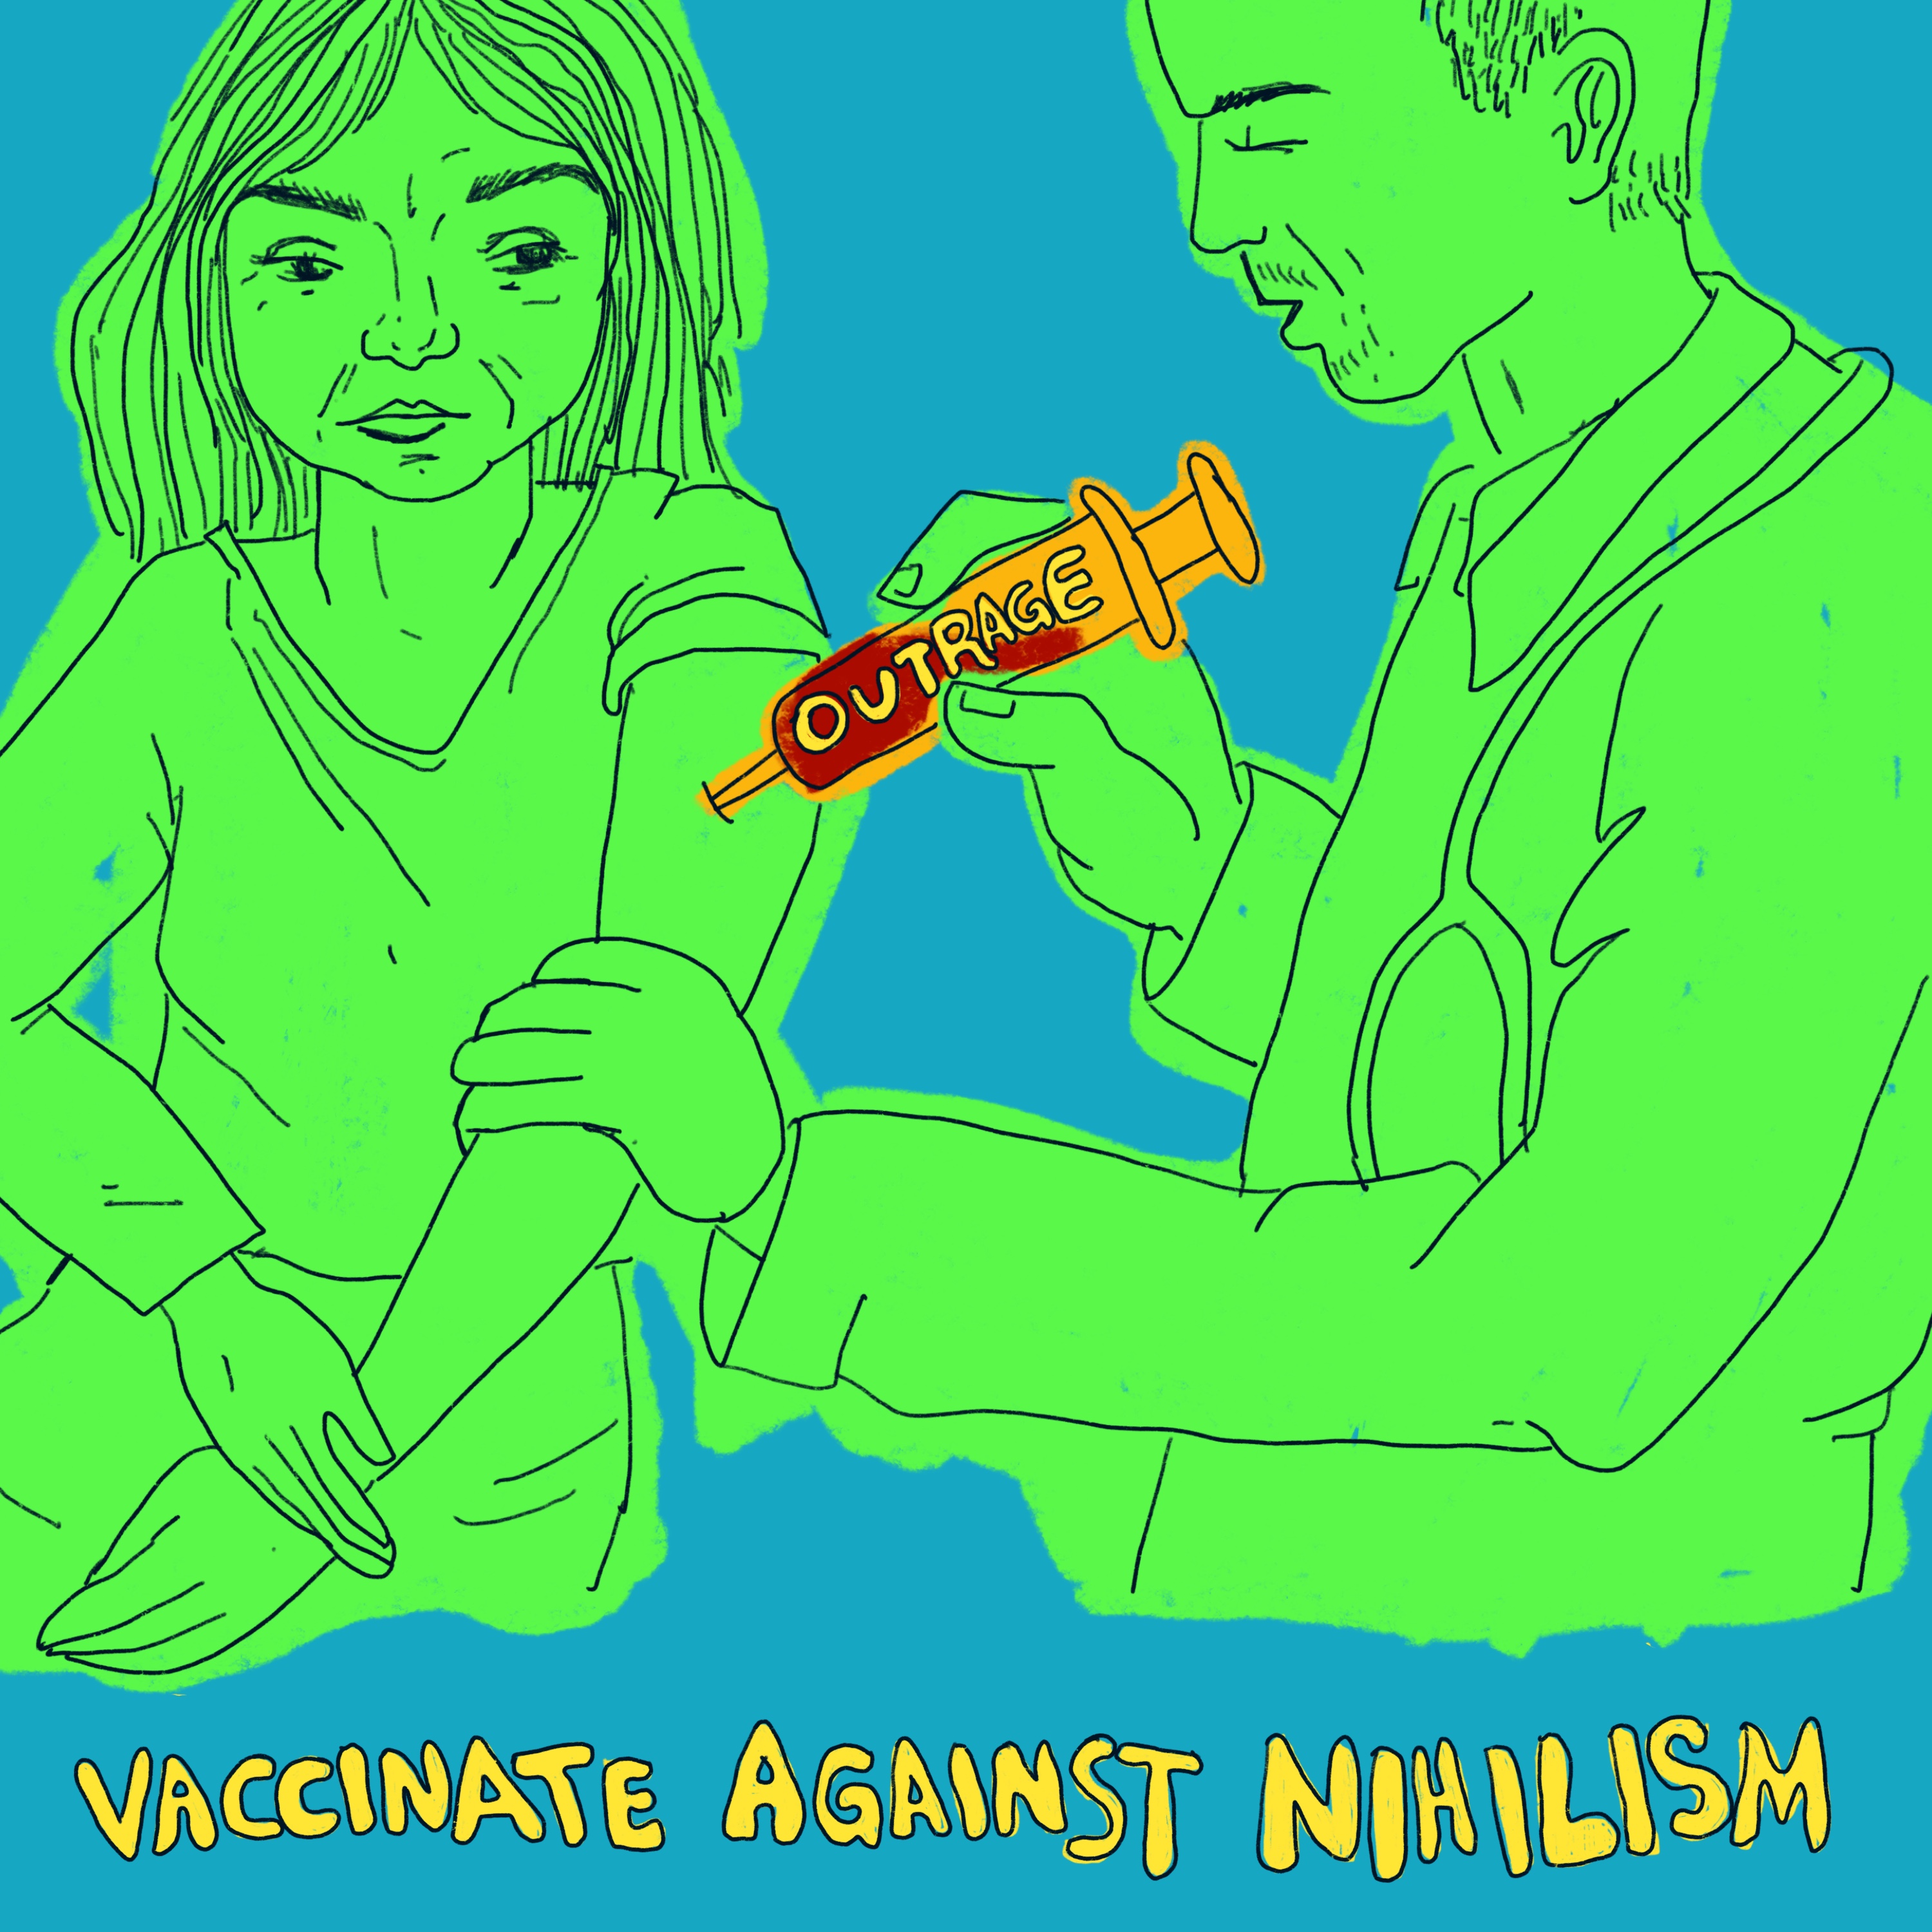 bright green illustration of a doctor injecting a female patient with a vial full of "outrage"